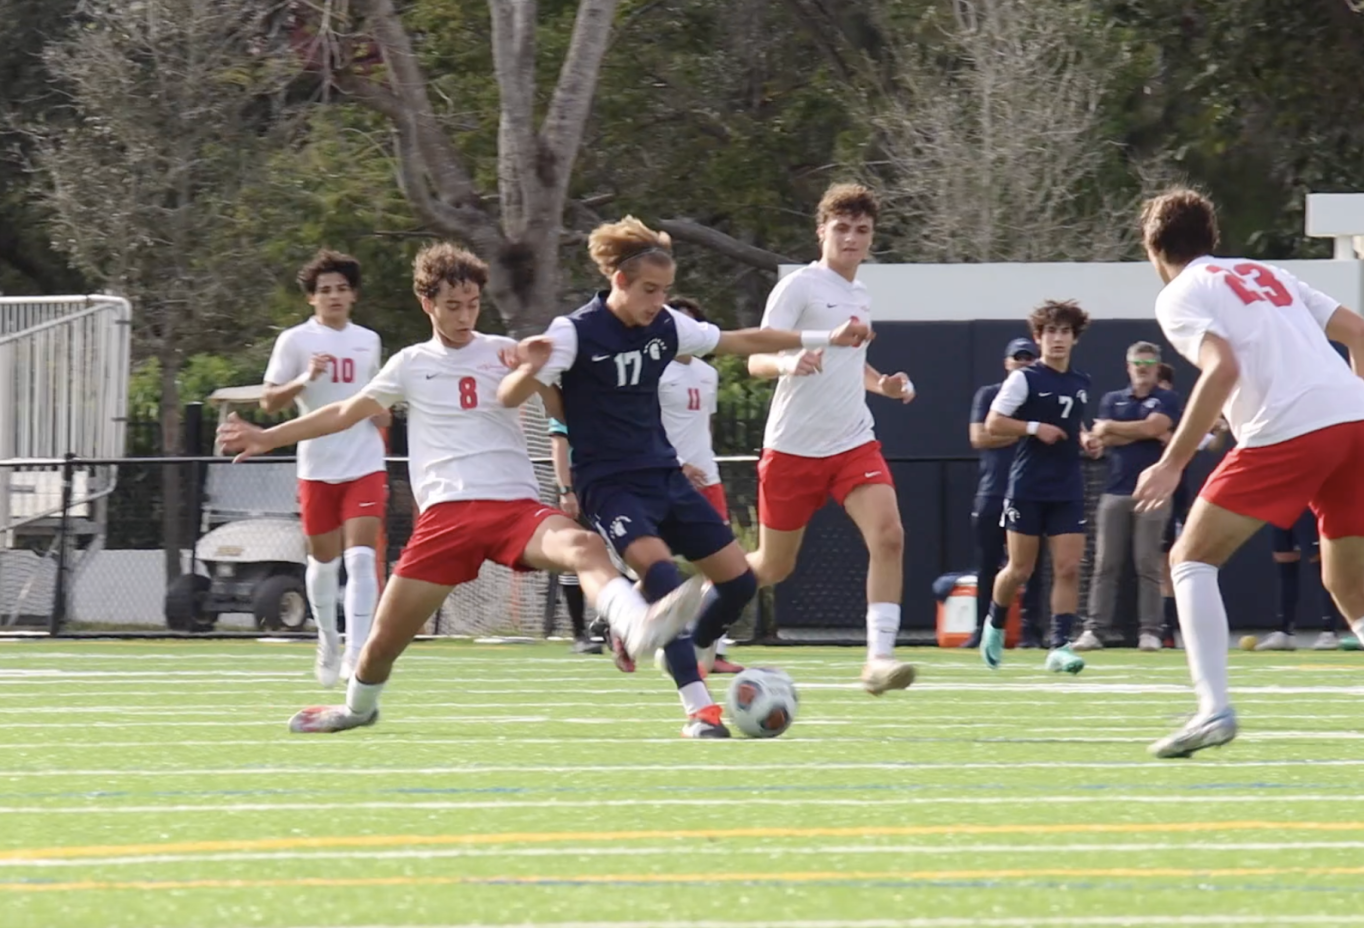 Varsity Boys Soccer Team Wins District Championship with Record Undefeated Season